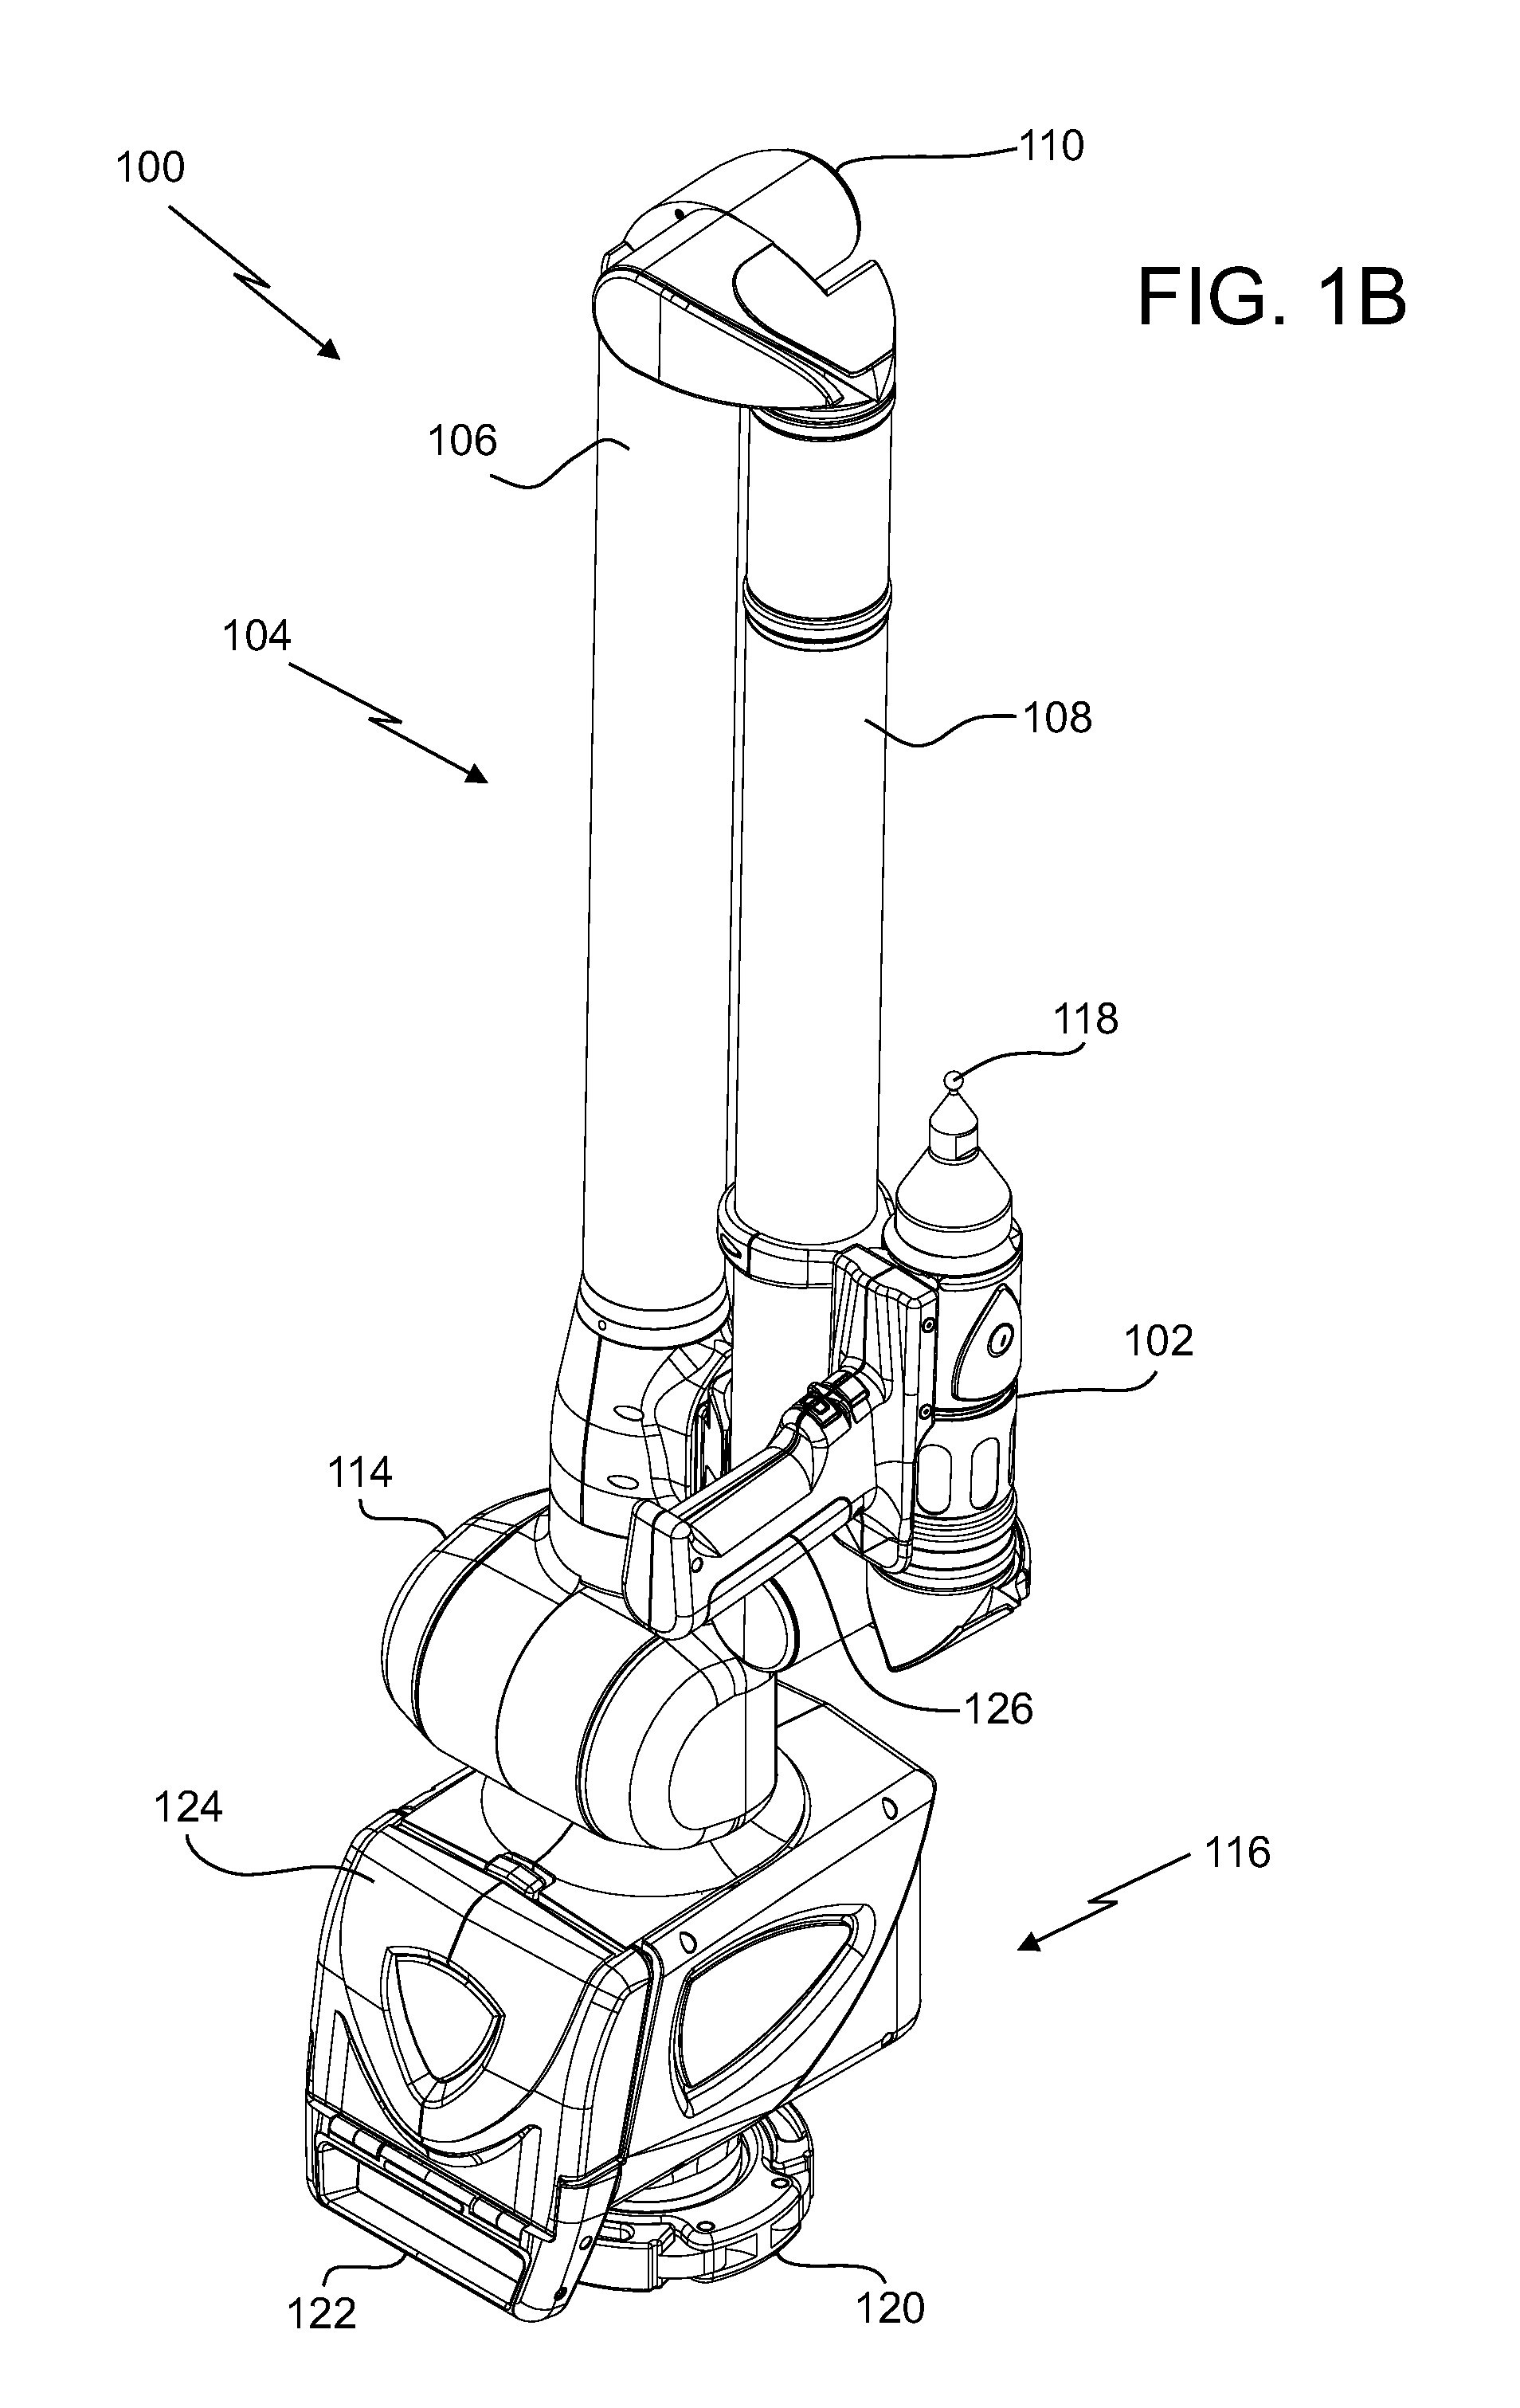 Measurement machine utilizing a barcode to identify an inspection plan for an object